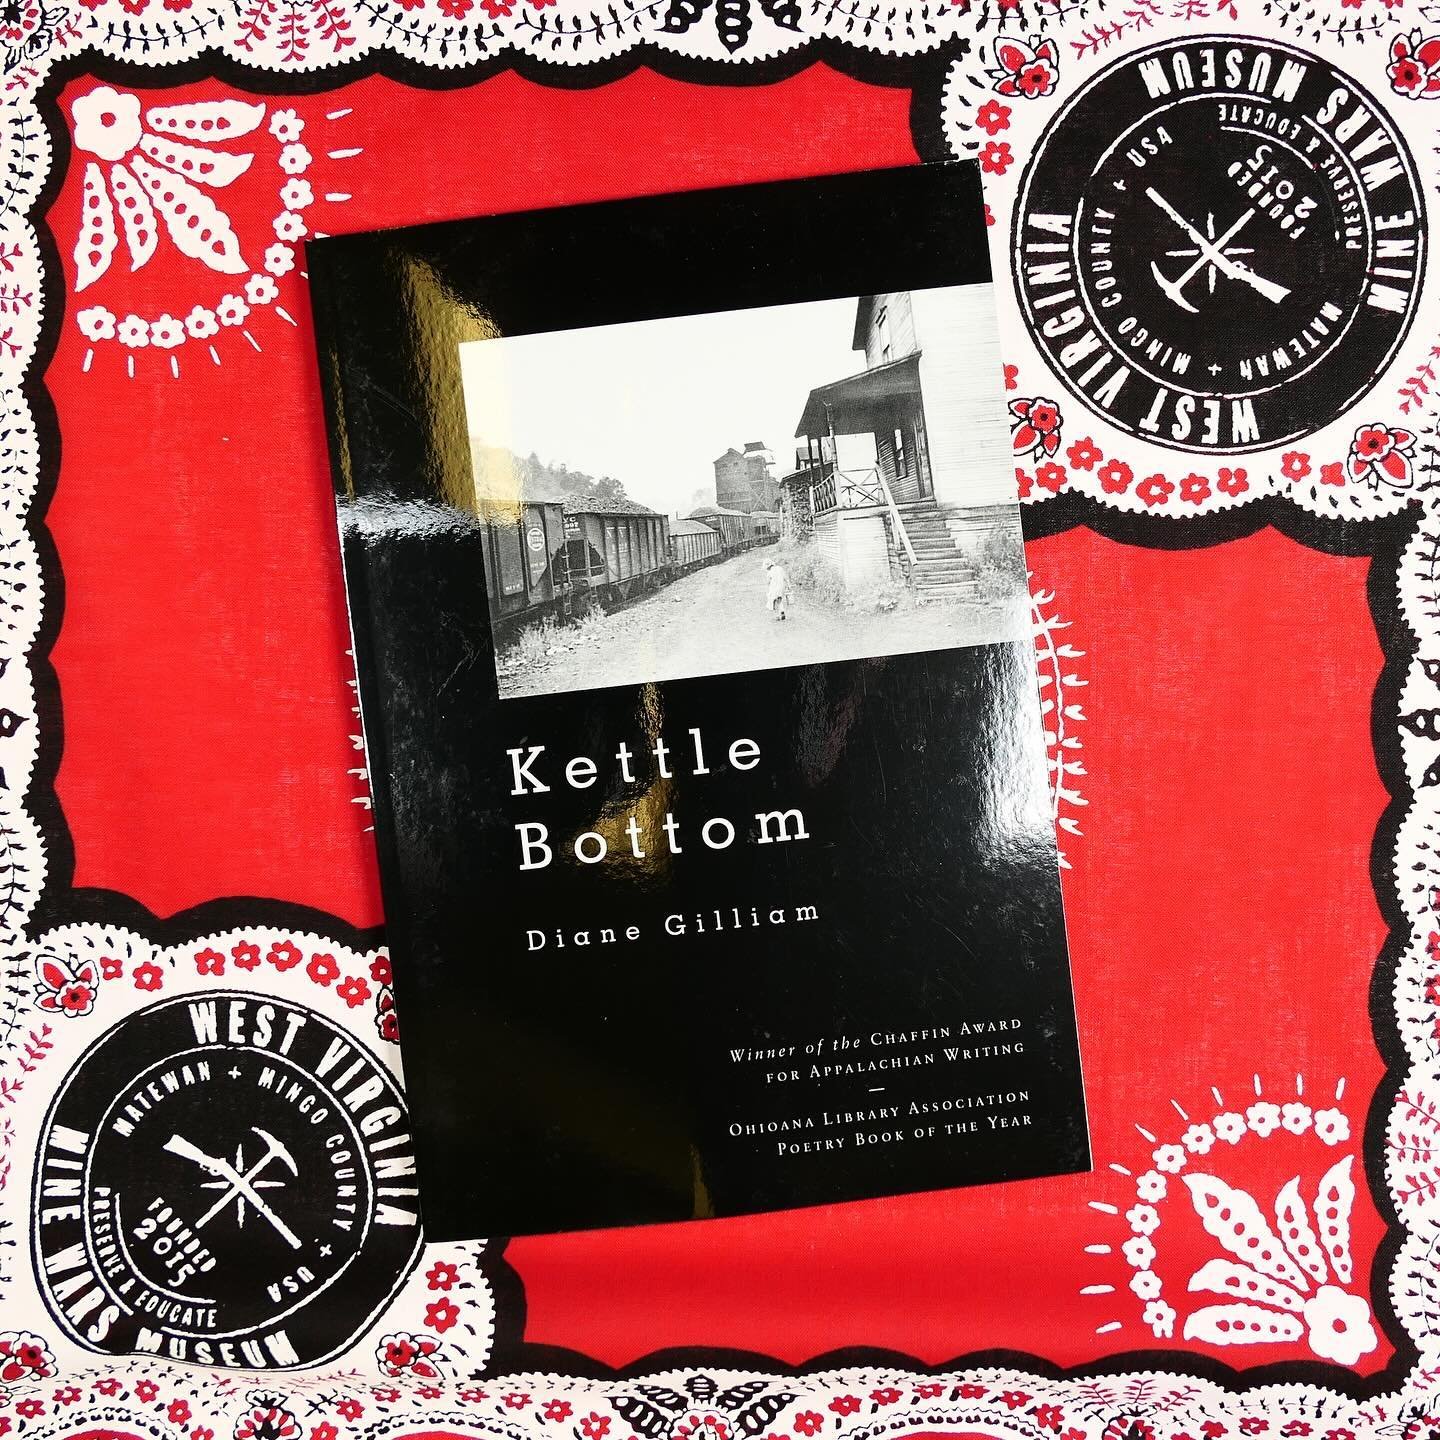 📖 Did you know we carry over 40 Appalachian titles in our bookshop? 📚 If poetry is your thing, may we heartily recommend Kettlebottom by Diane Gilliam? 
Written in the voices of people living and working in the coal camps during the West Virginia c